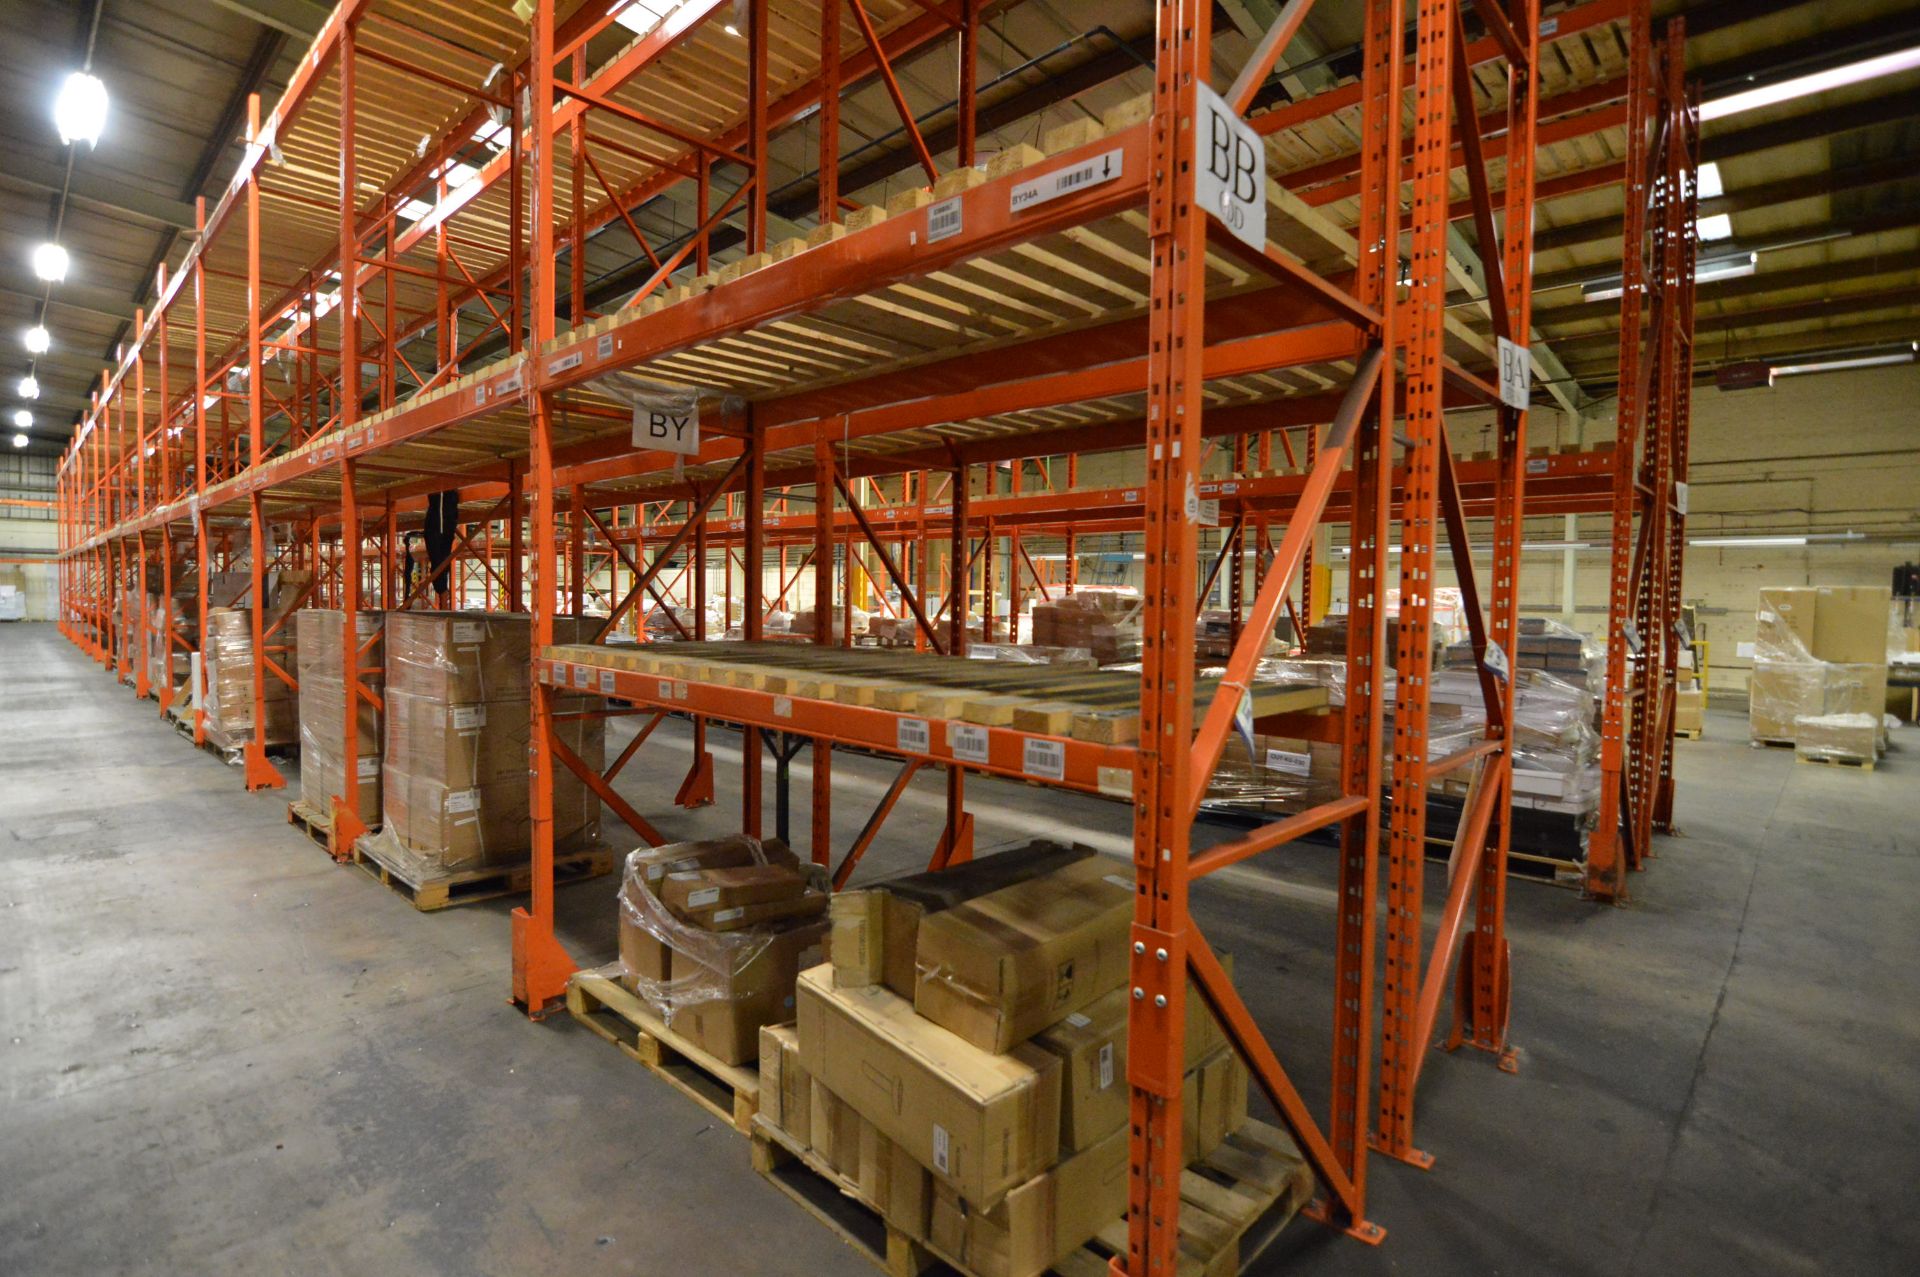 Redirack SD 2.50 DOUBLE SIDED 30 BAY MAINLY TWO TIER PALLET RACK, each run approx. 41m x 1m x 5.4m - Image 4 of 4